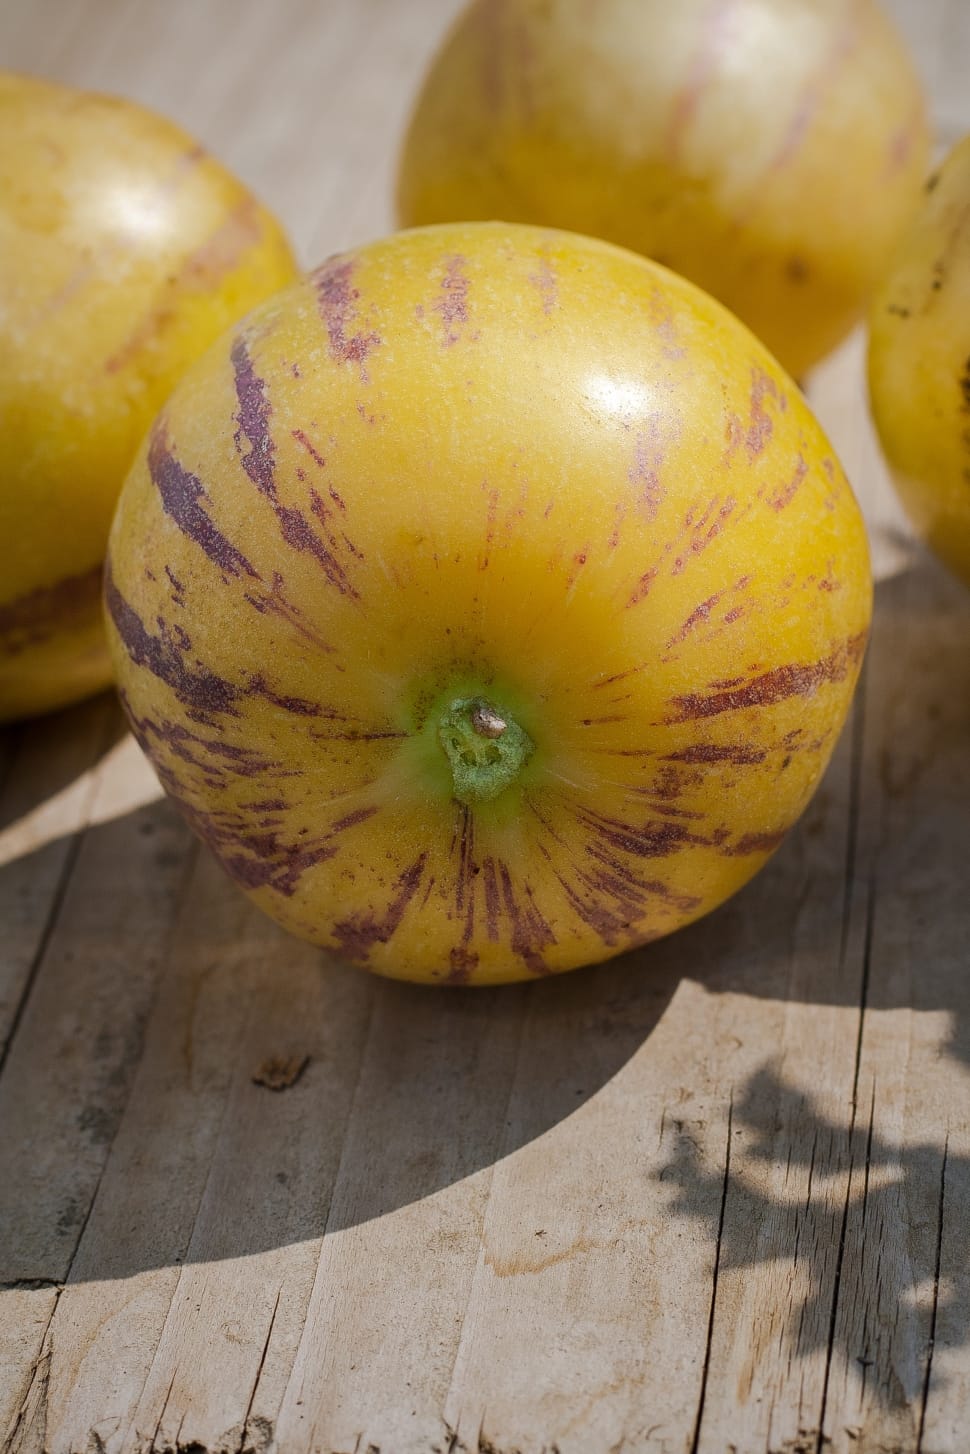 yellow round fruit preview